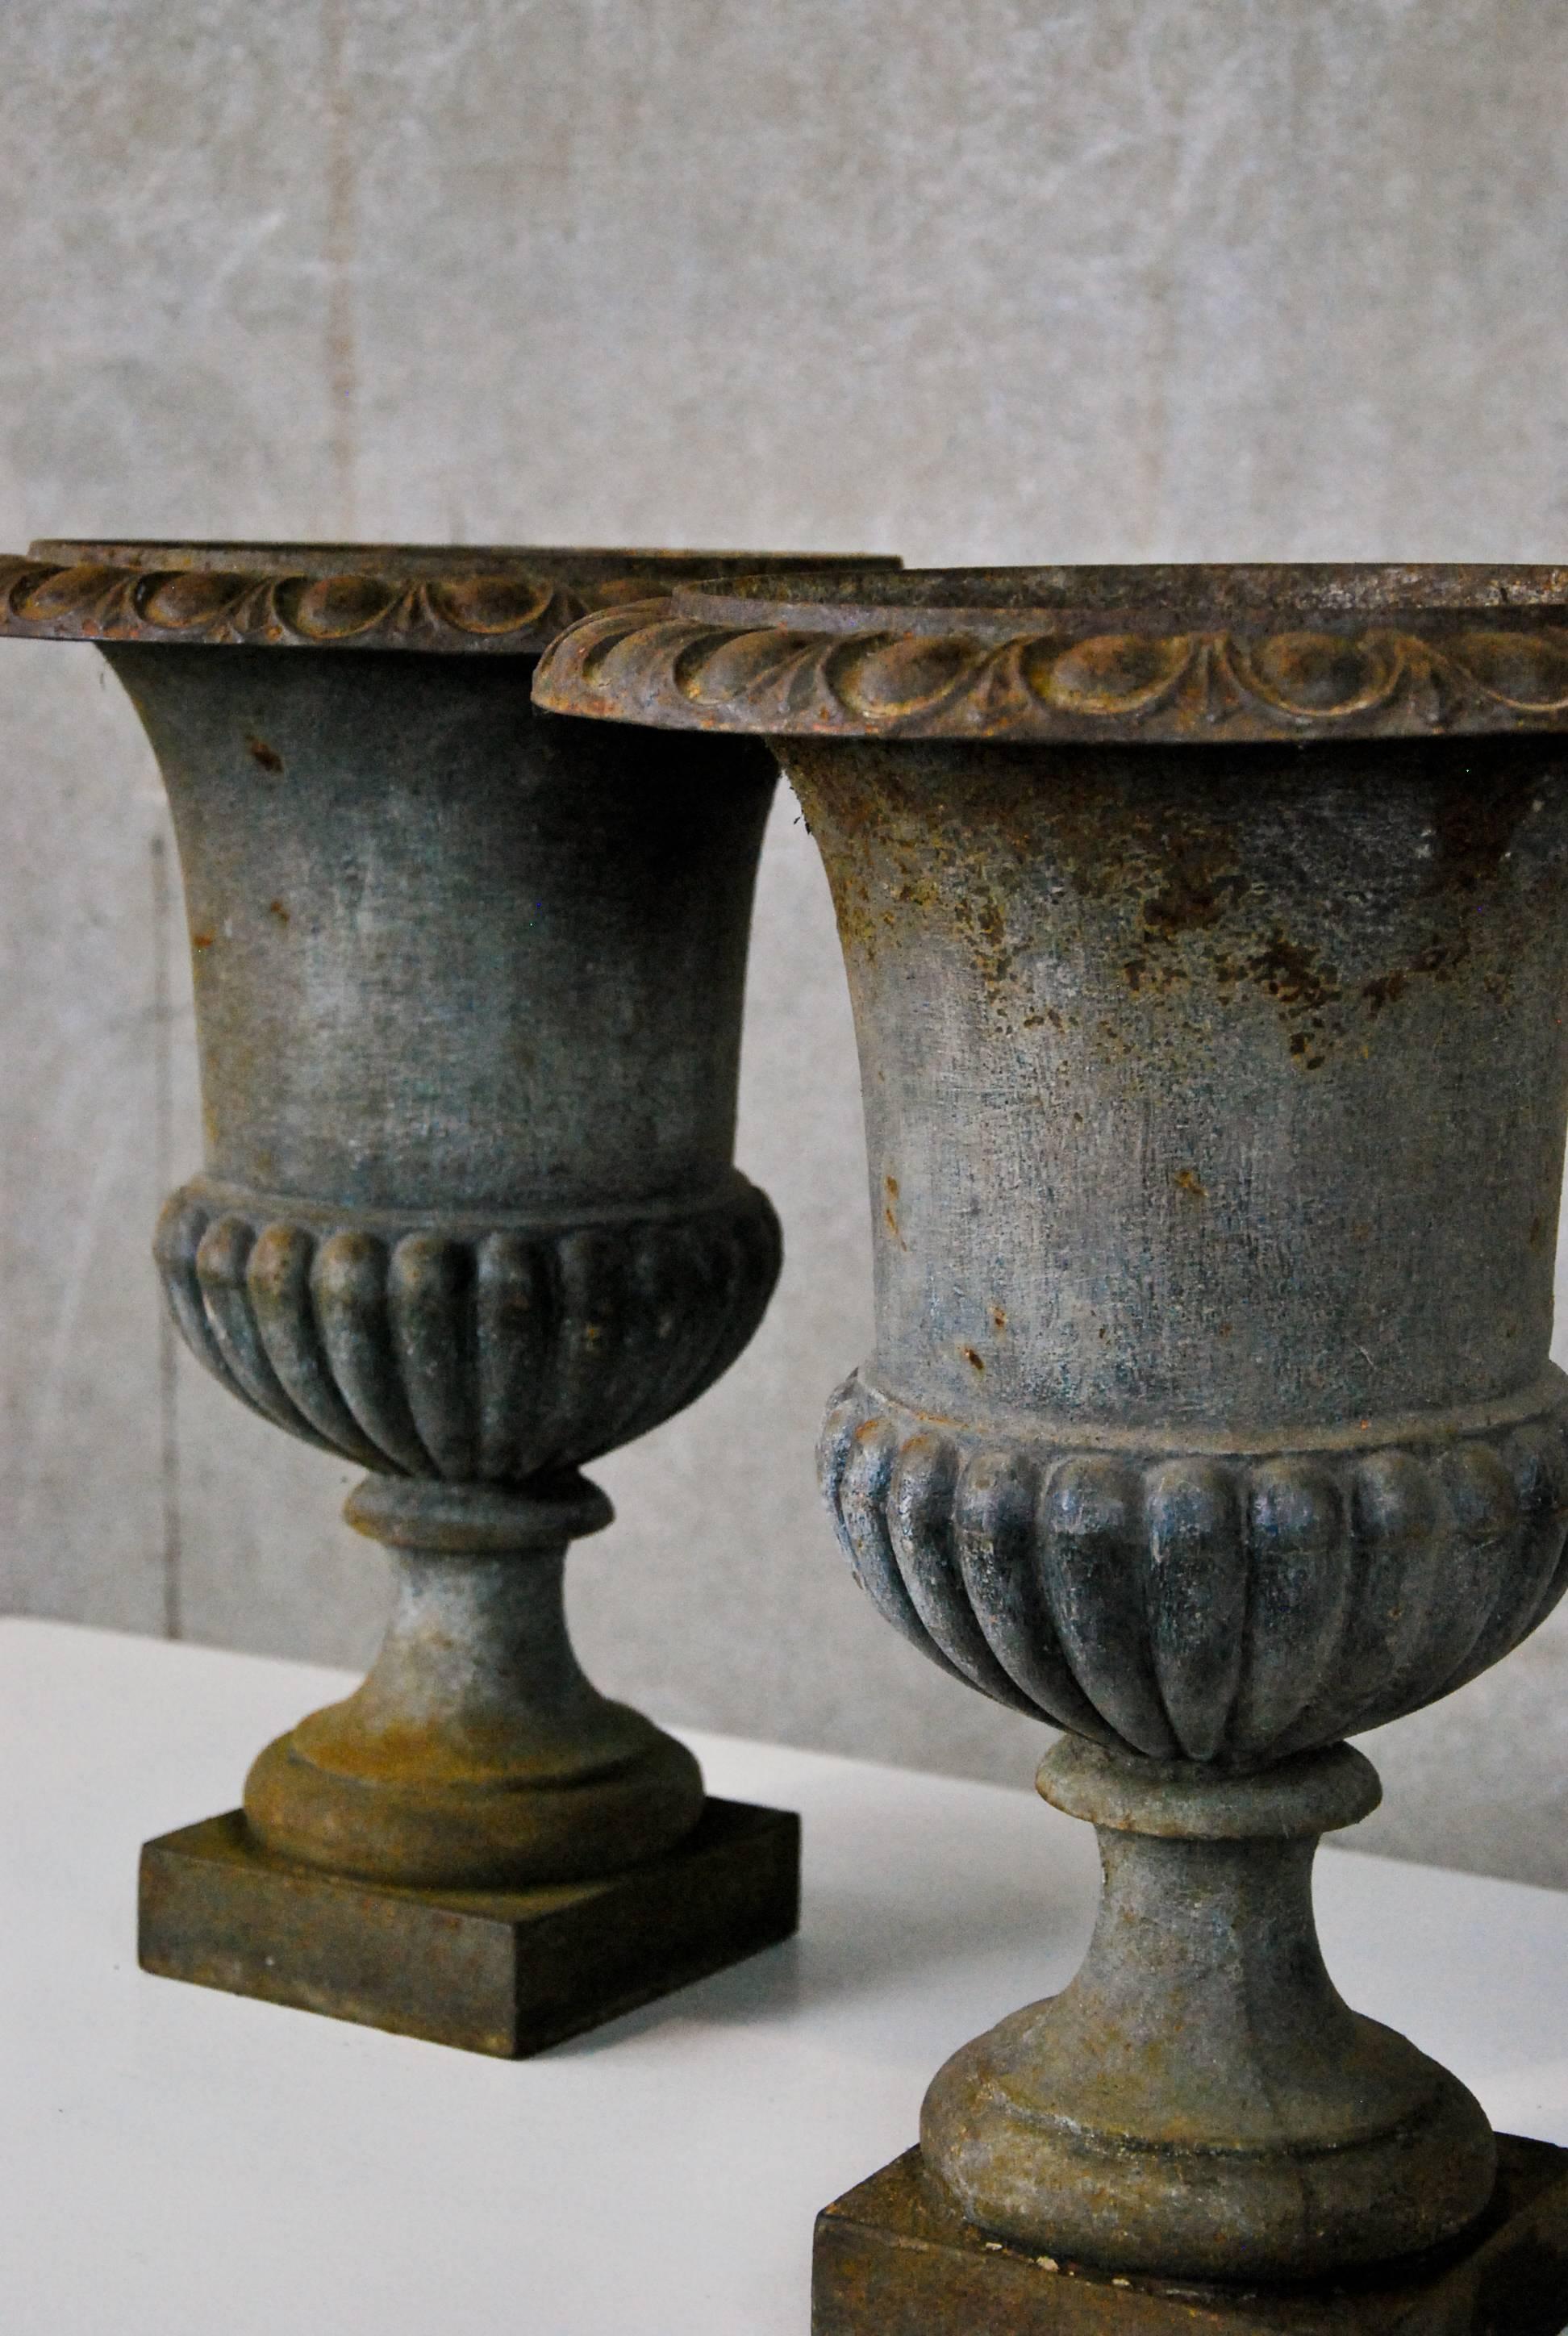 Pair of French urns brought to Canada in 1980 , showing very nice patina no cracks or breaks.